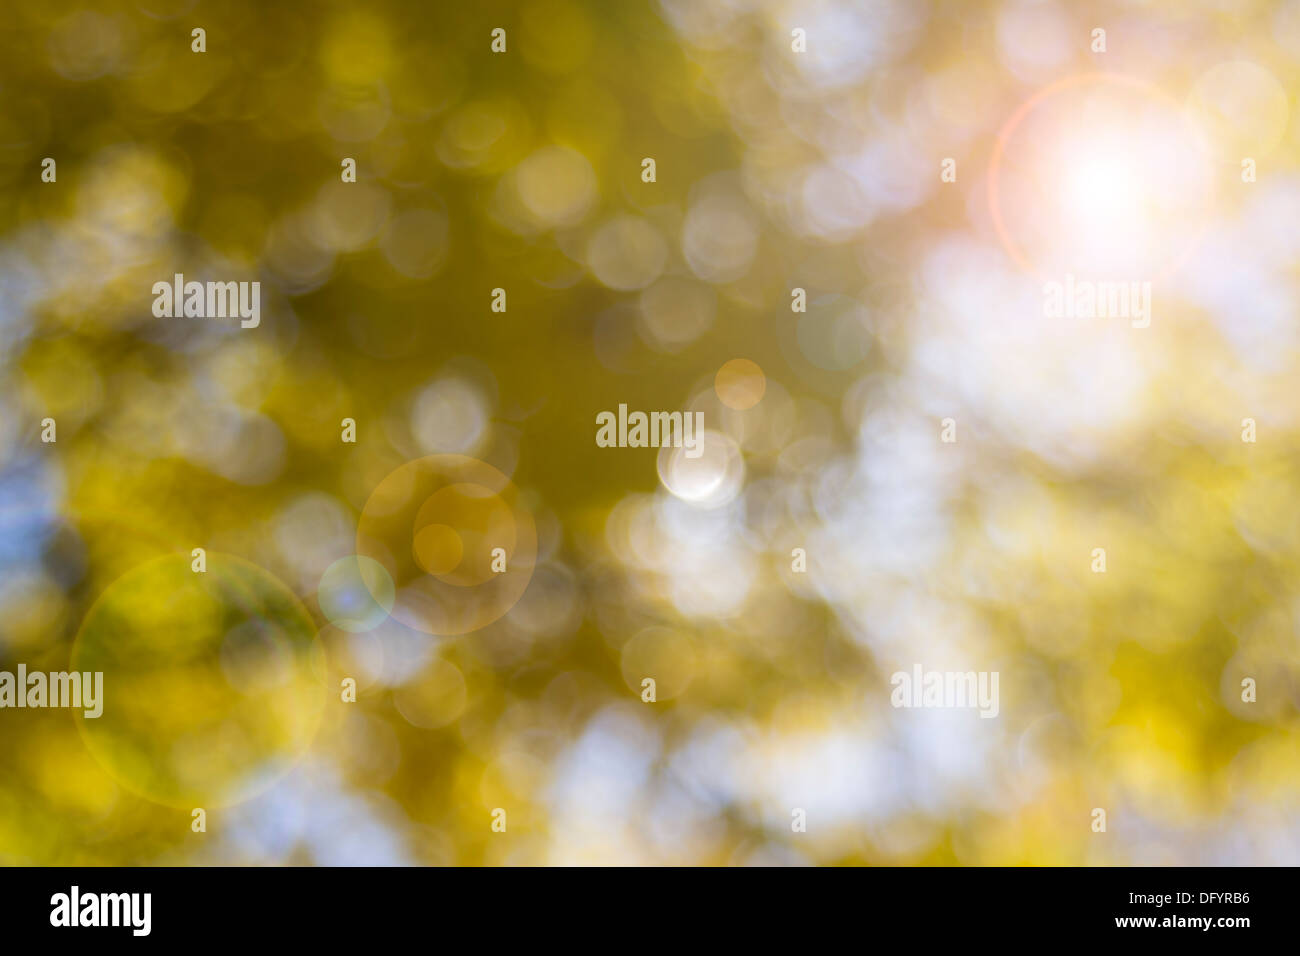 Yellow Fall Color Leaves Against Sunlight Blurred Background with Lens Flare Stock Photo